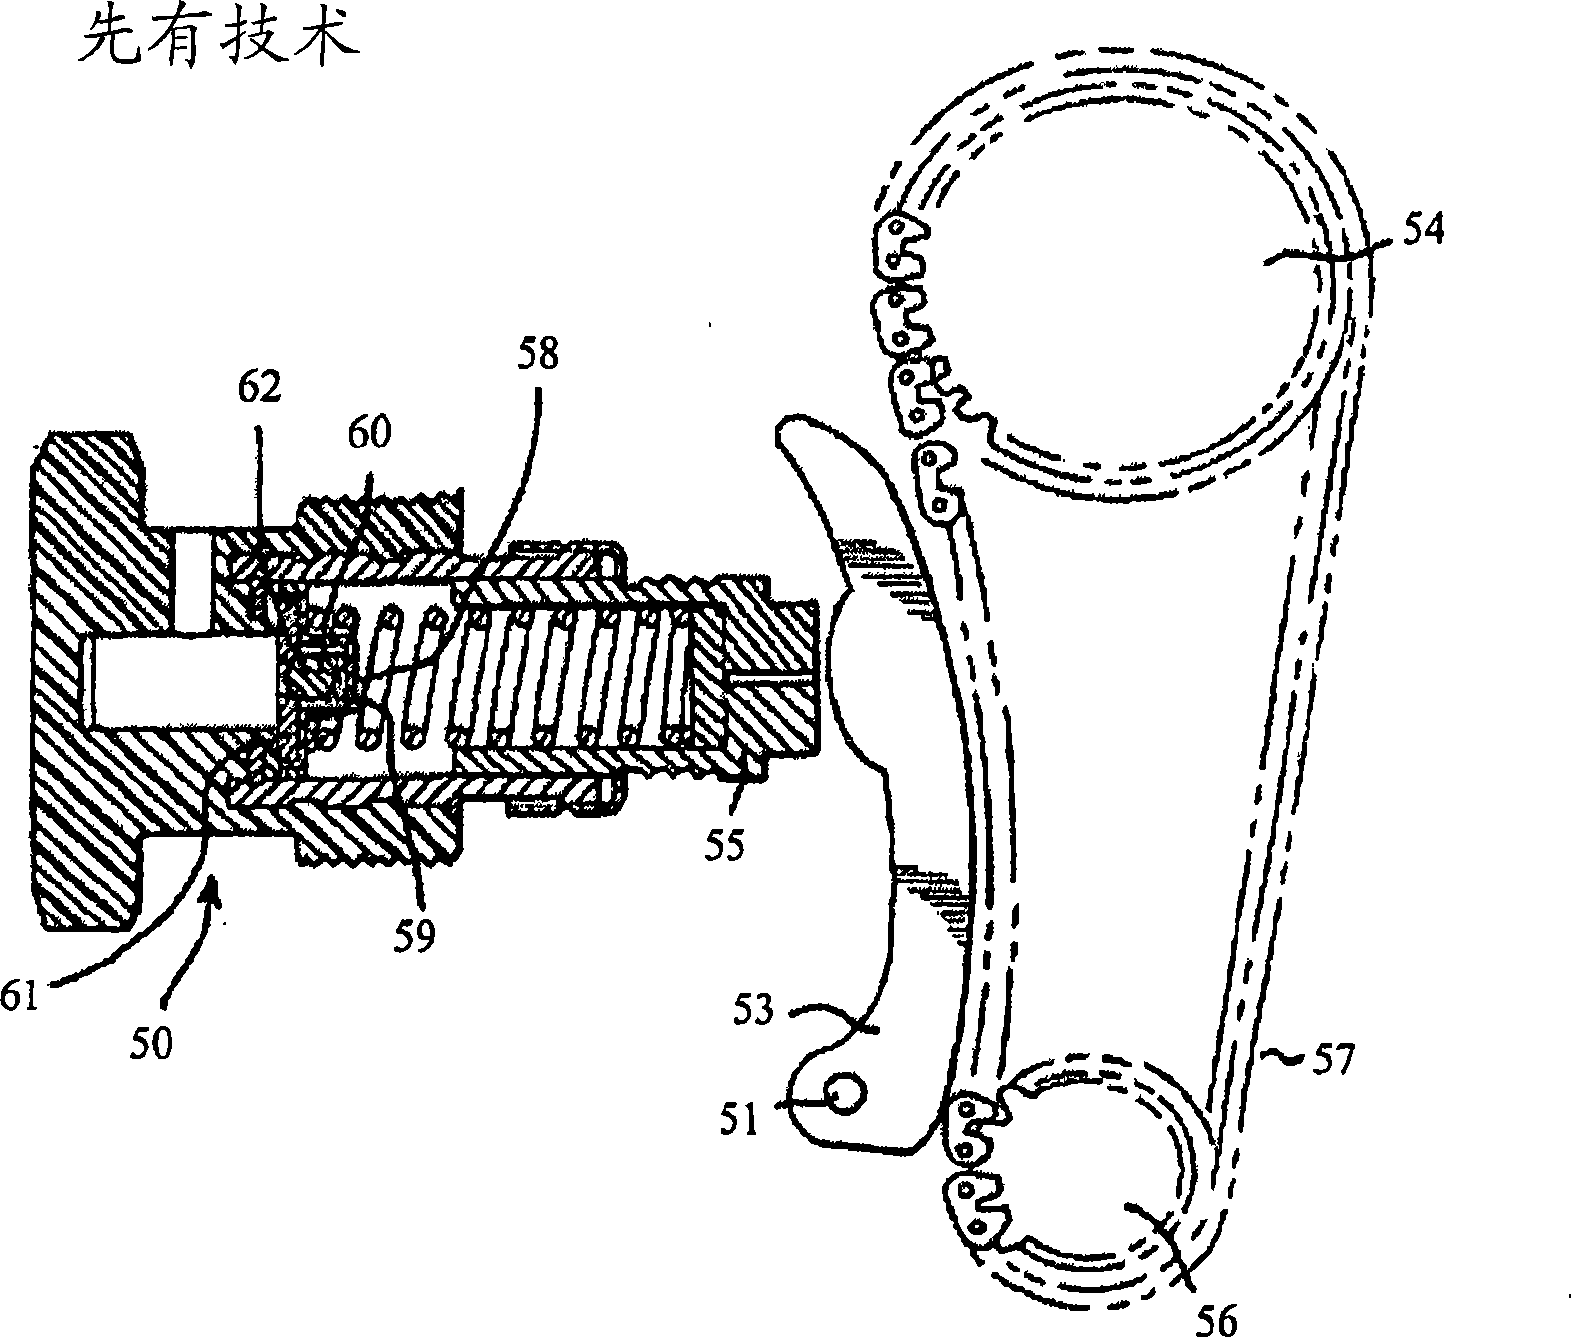 Ratcheting tensioner with a sliding and pivoting pawl